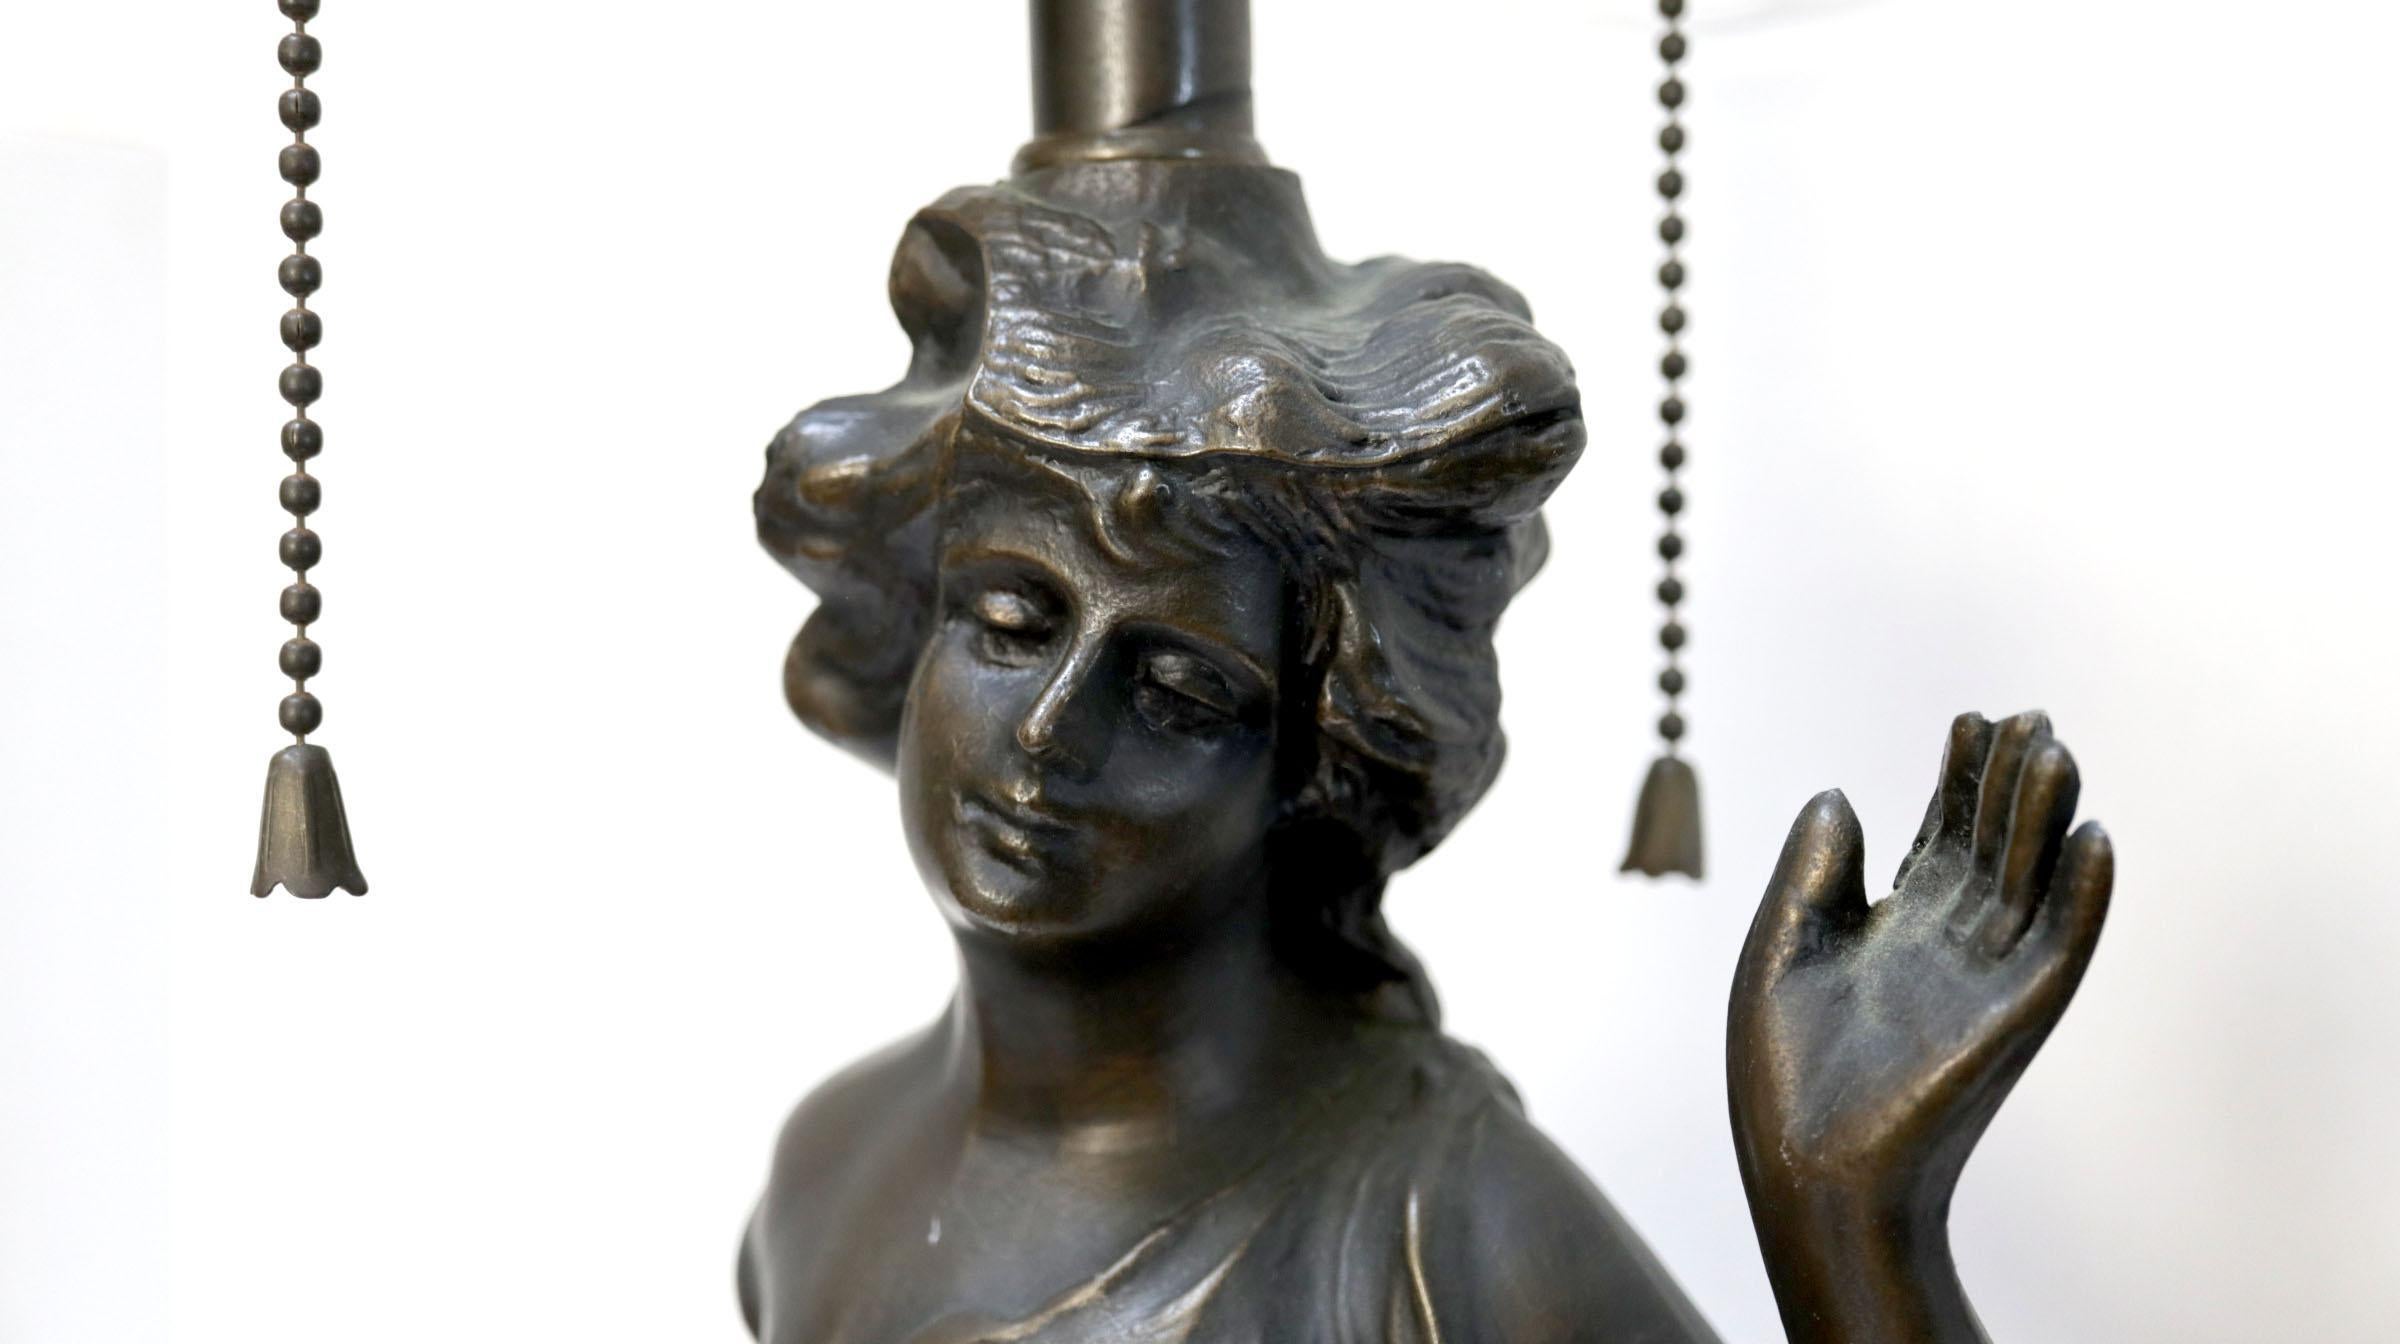 An antique Art Nouveau style bronze figural table lamp is from Europe circa 1925. It is in the French taste in the form of a woman in classical drapery standing on one foot on a tall circular section base with floral detailing. The lamp has two